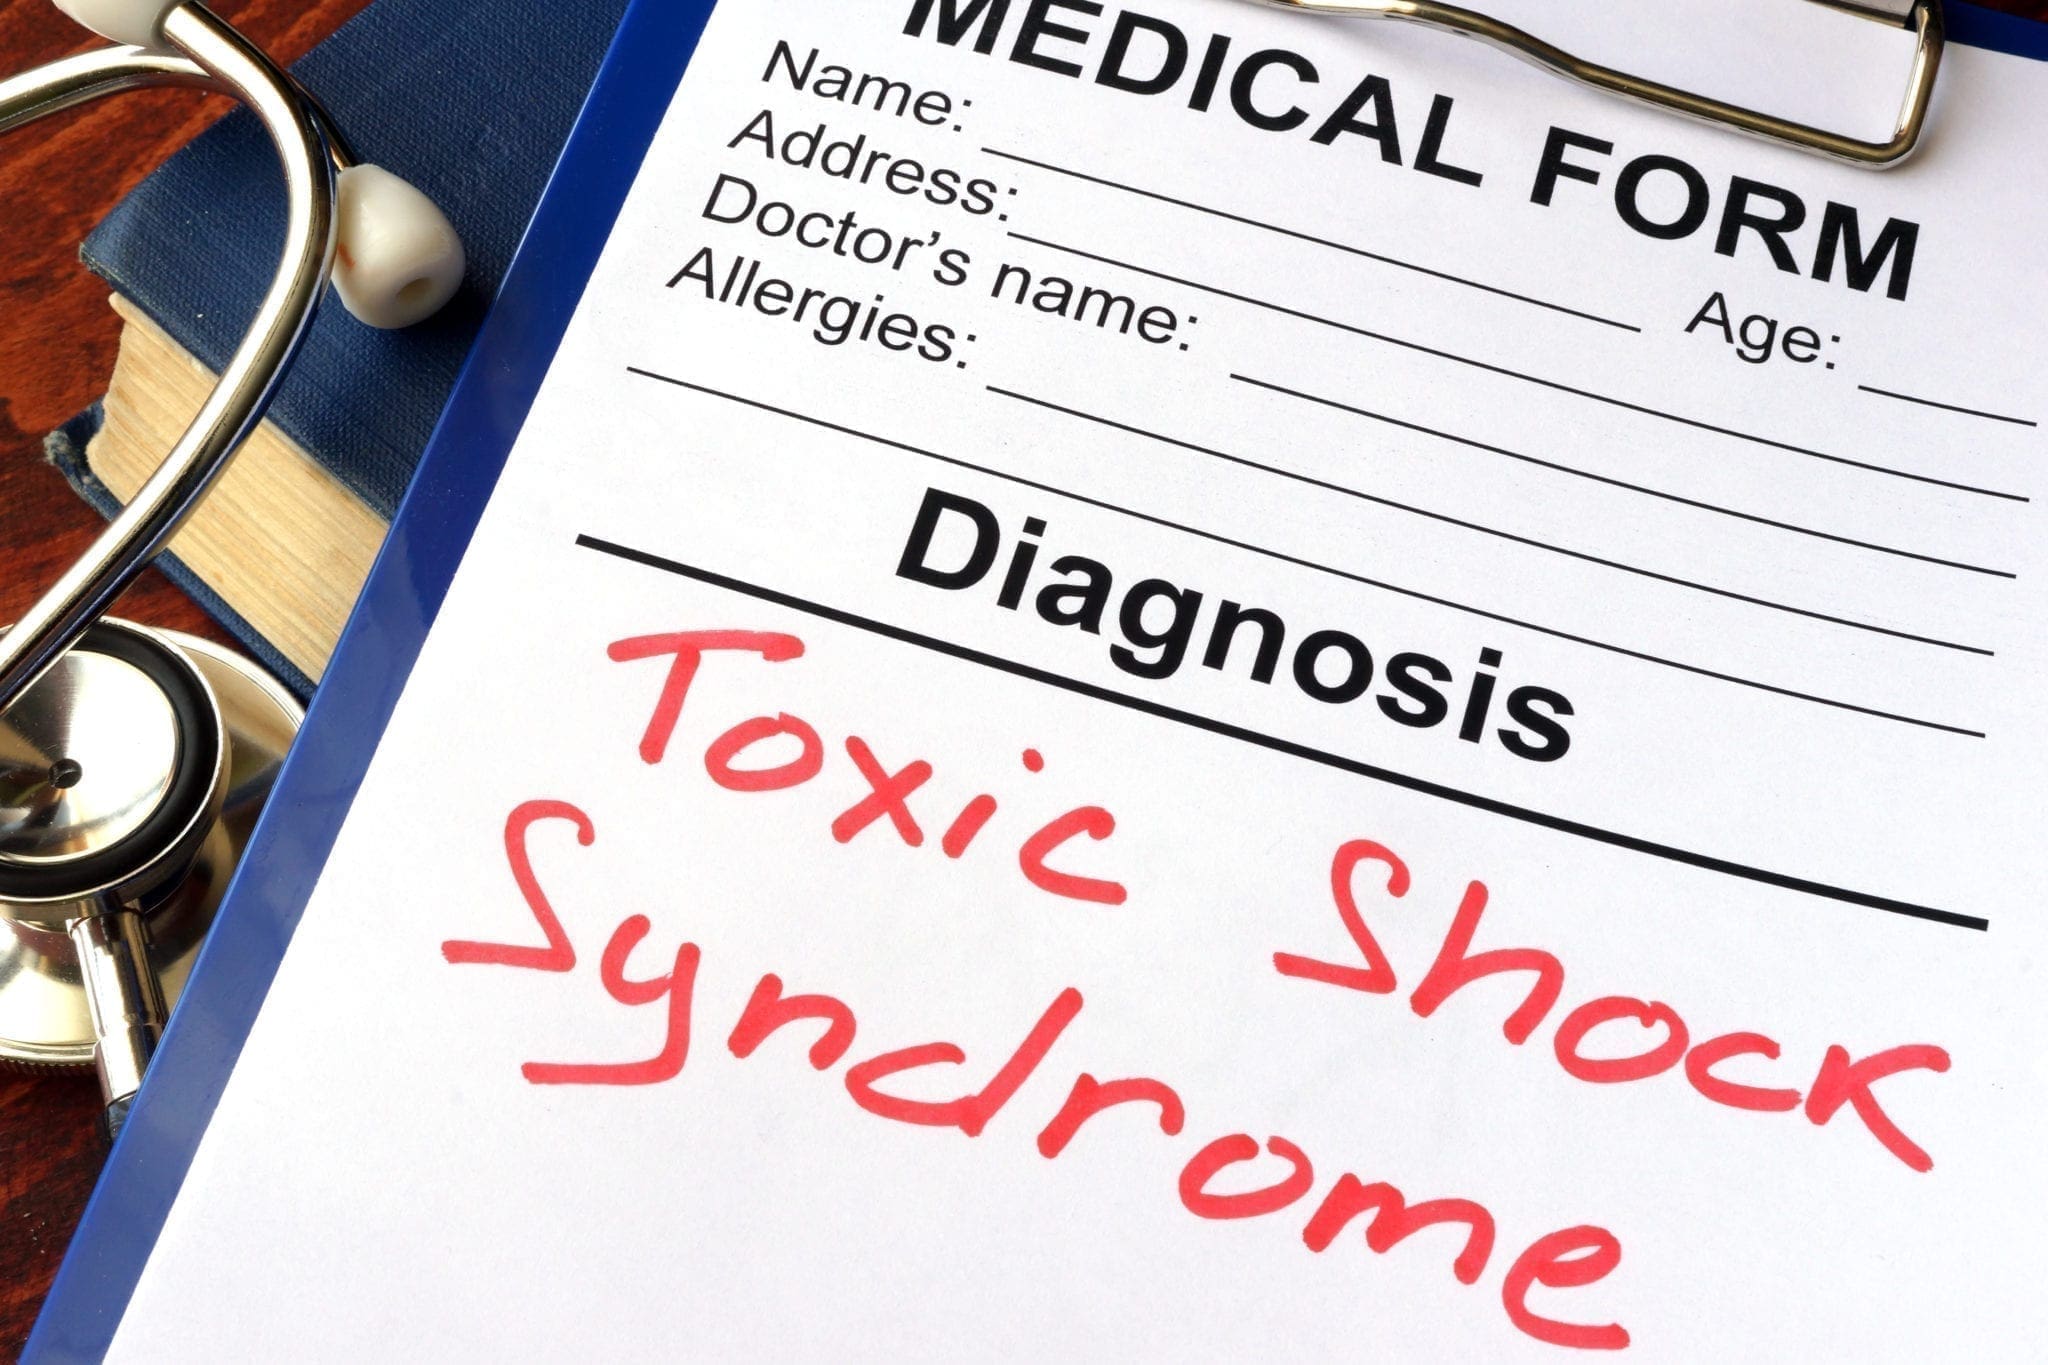 Toxic Shock Syndrome - Symptoms and Causes